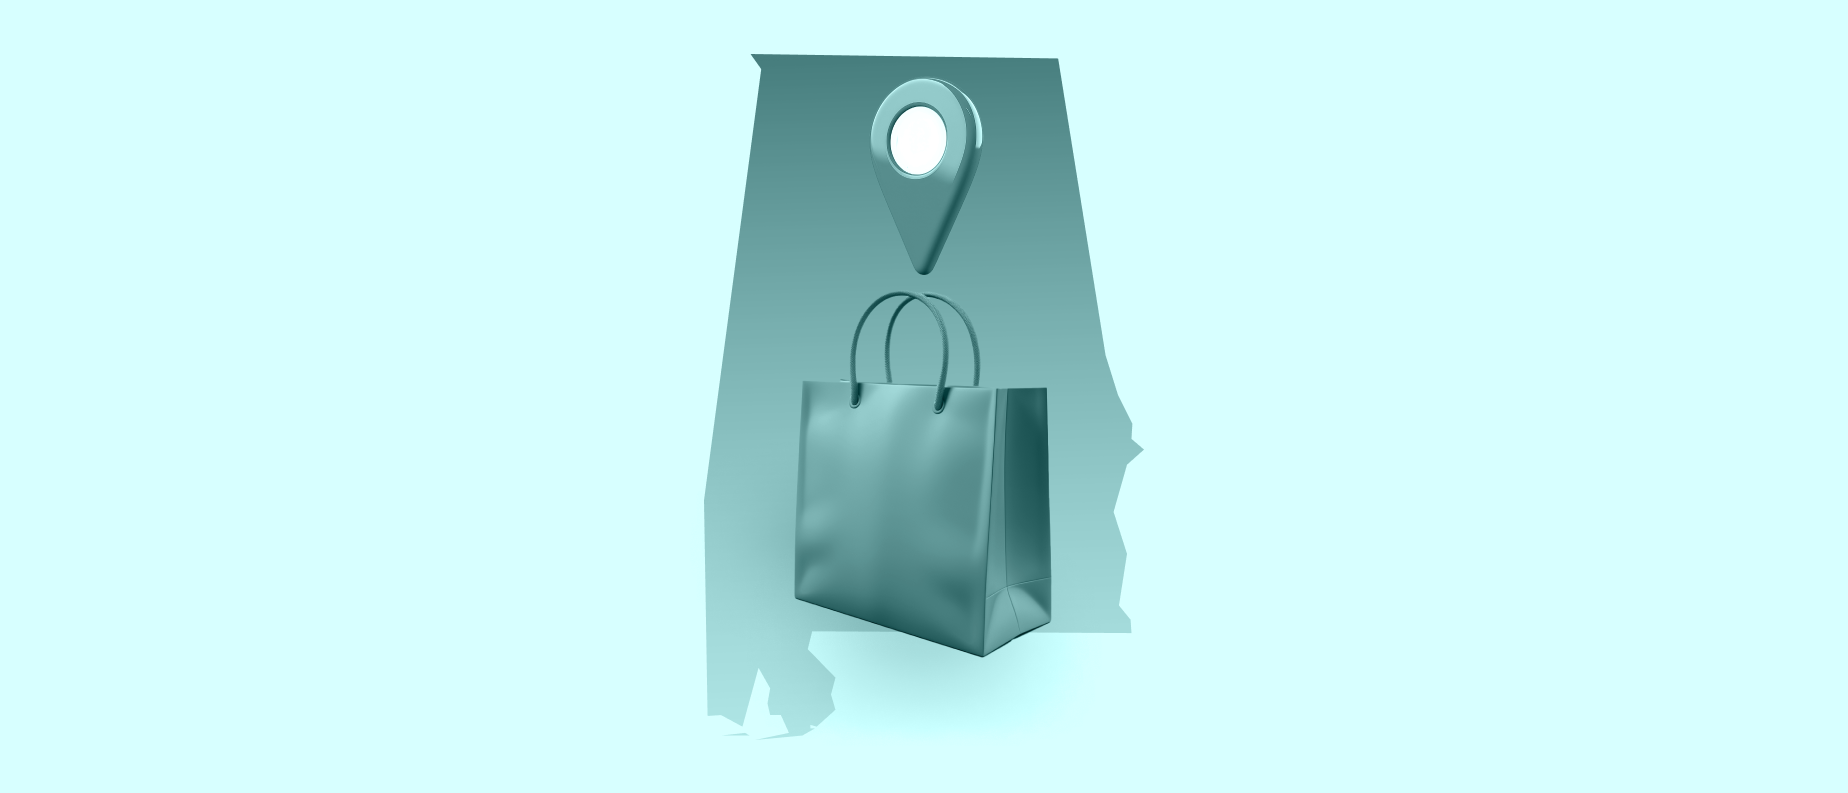 A blue outline of the state of Alabama with a shopping bag and location icon on a light blue background.